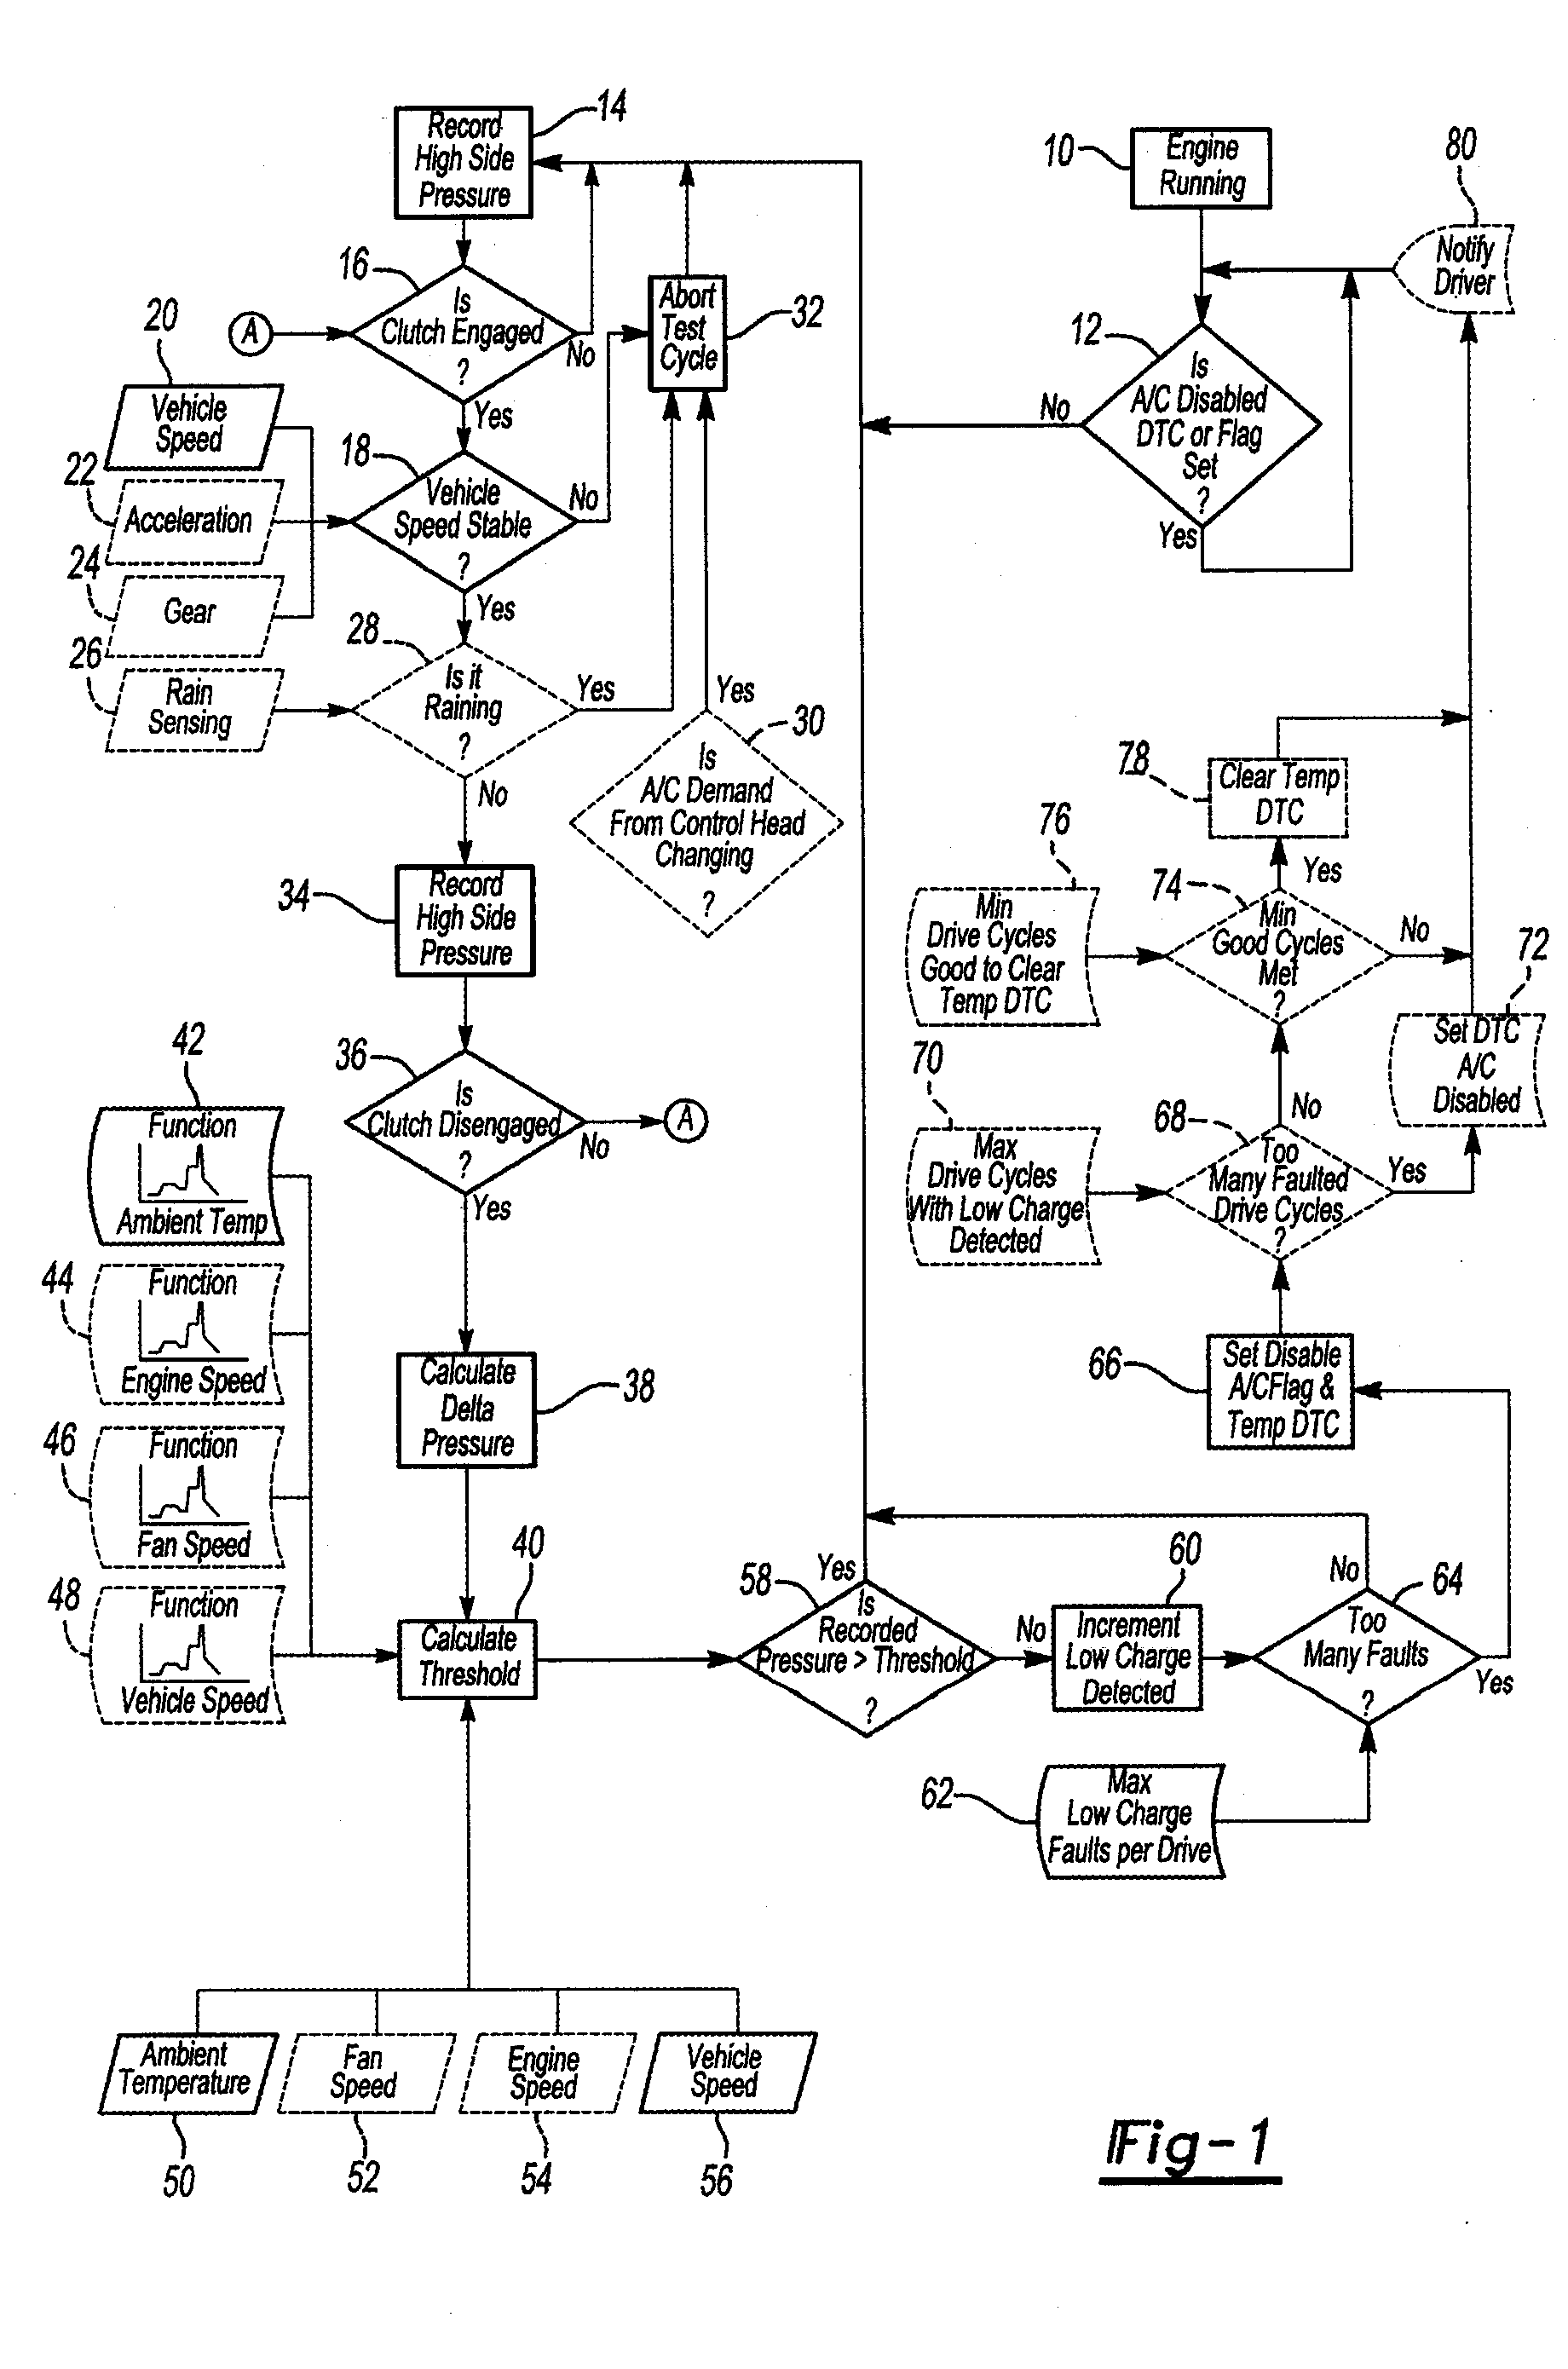 Method and System for Detecting Low Refrigerant Charge and Air Conditioner Protection System